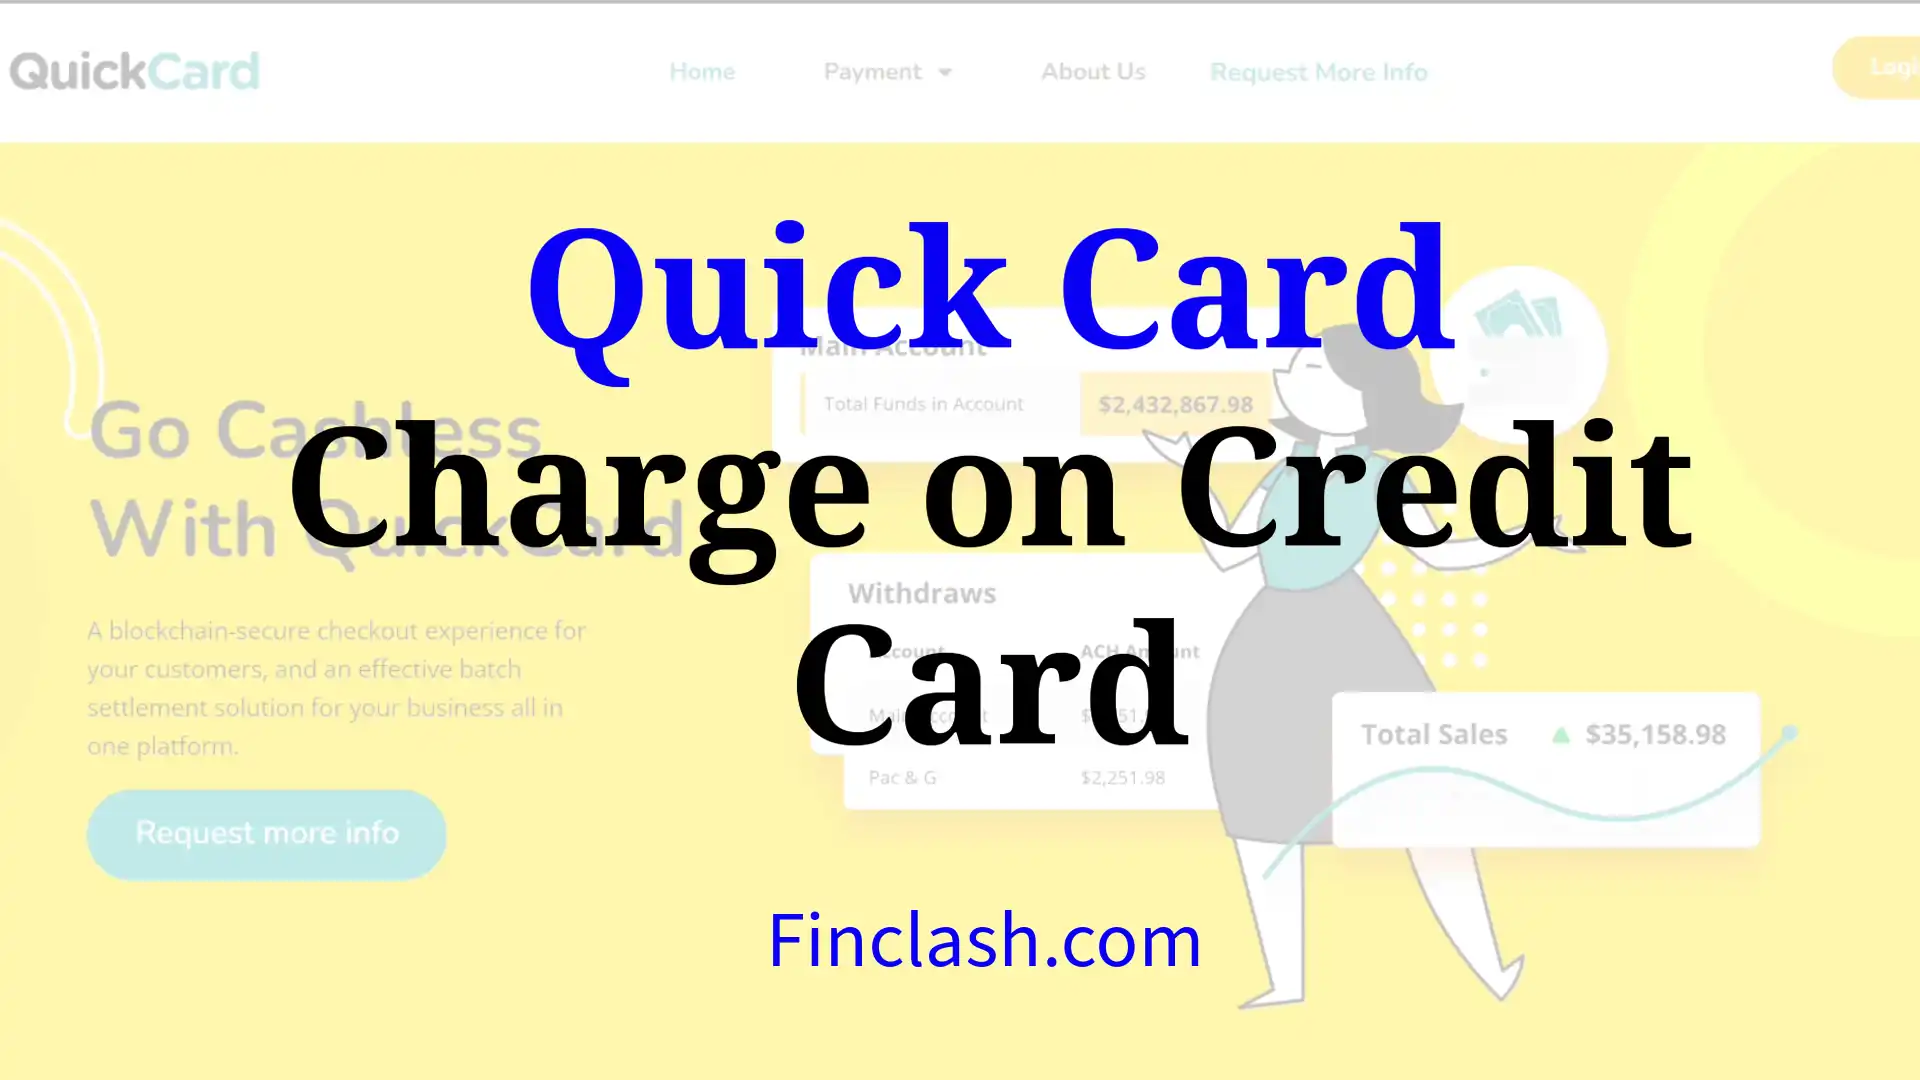 What is Quick Card San Diego Charges on Credit Card